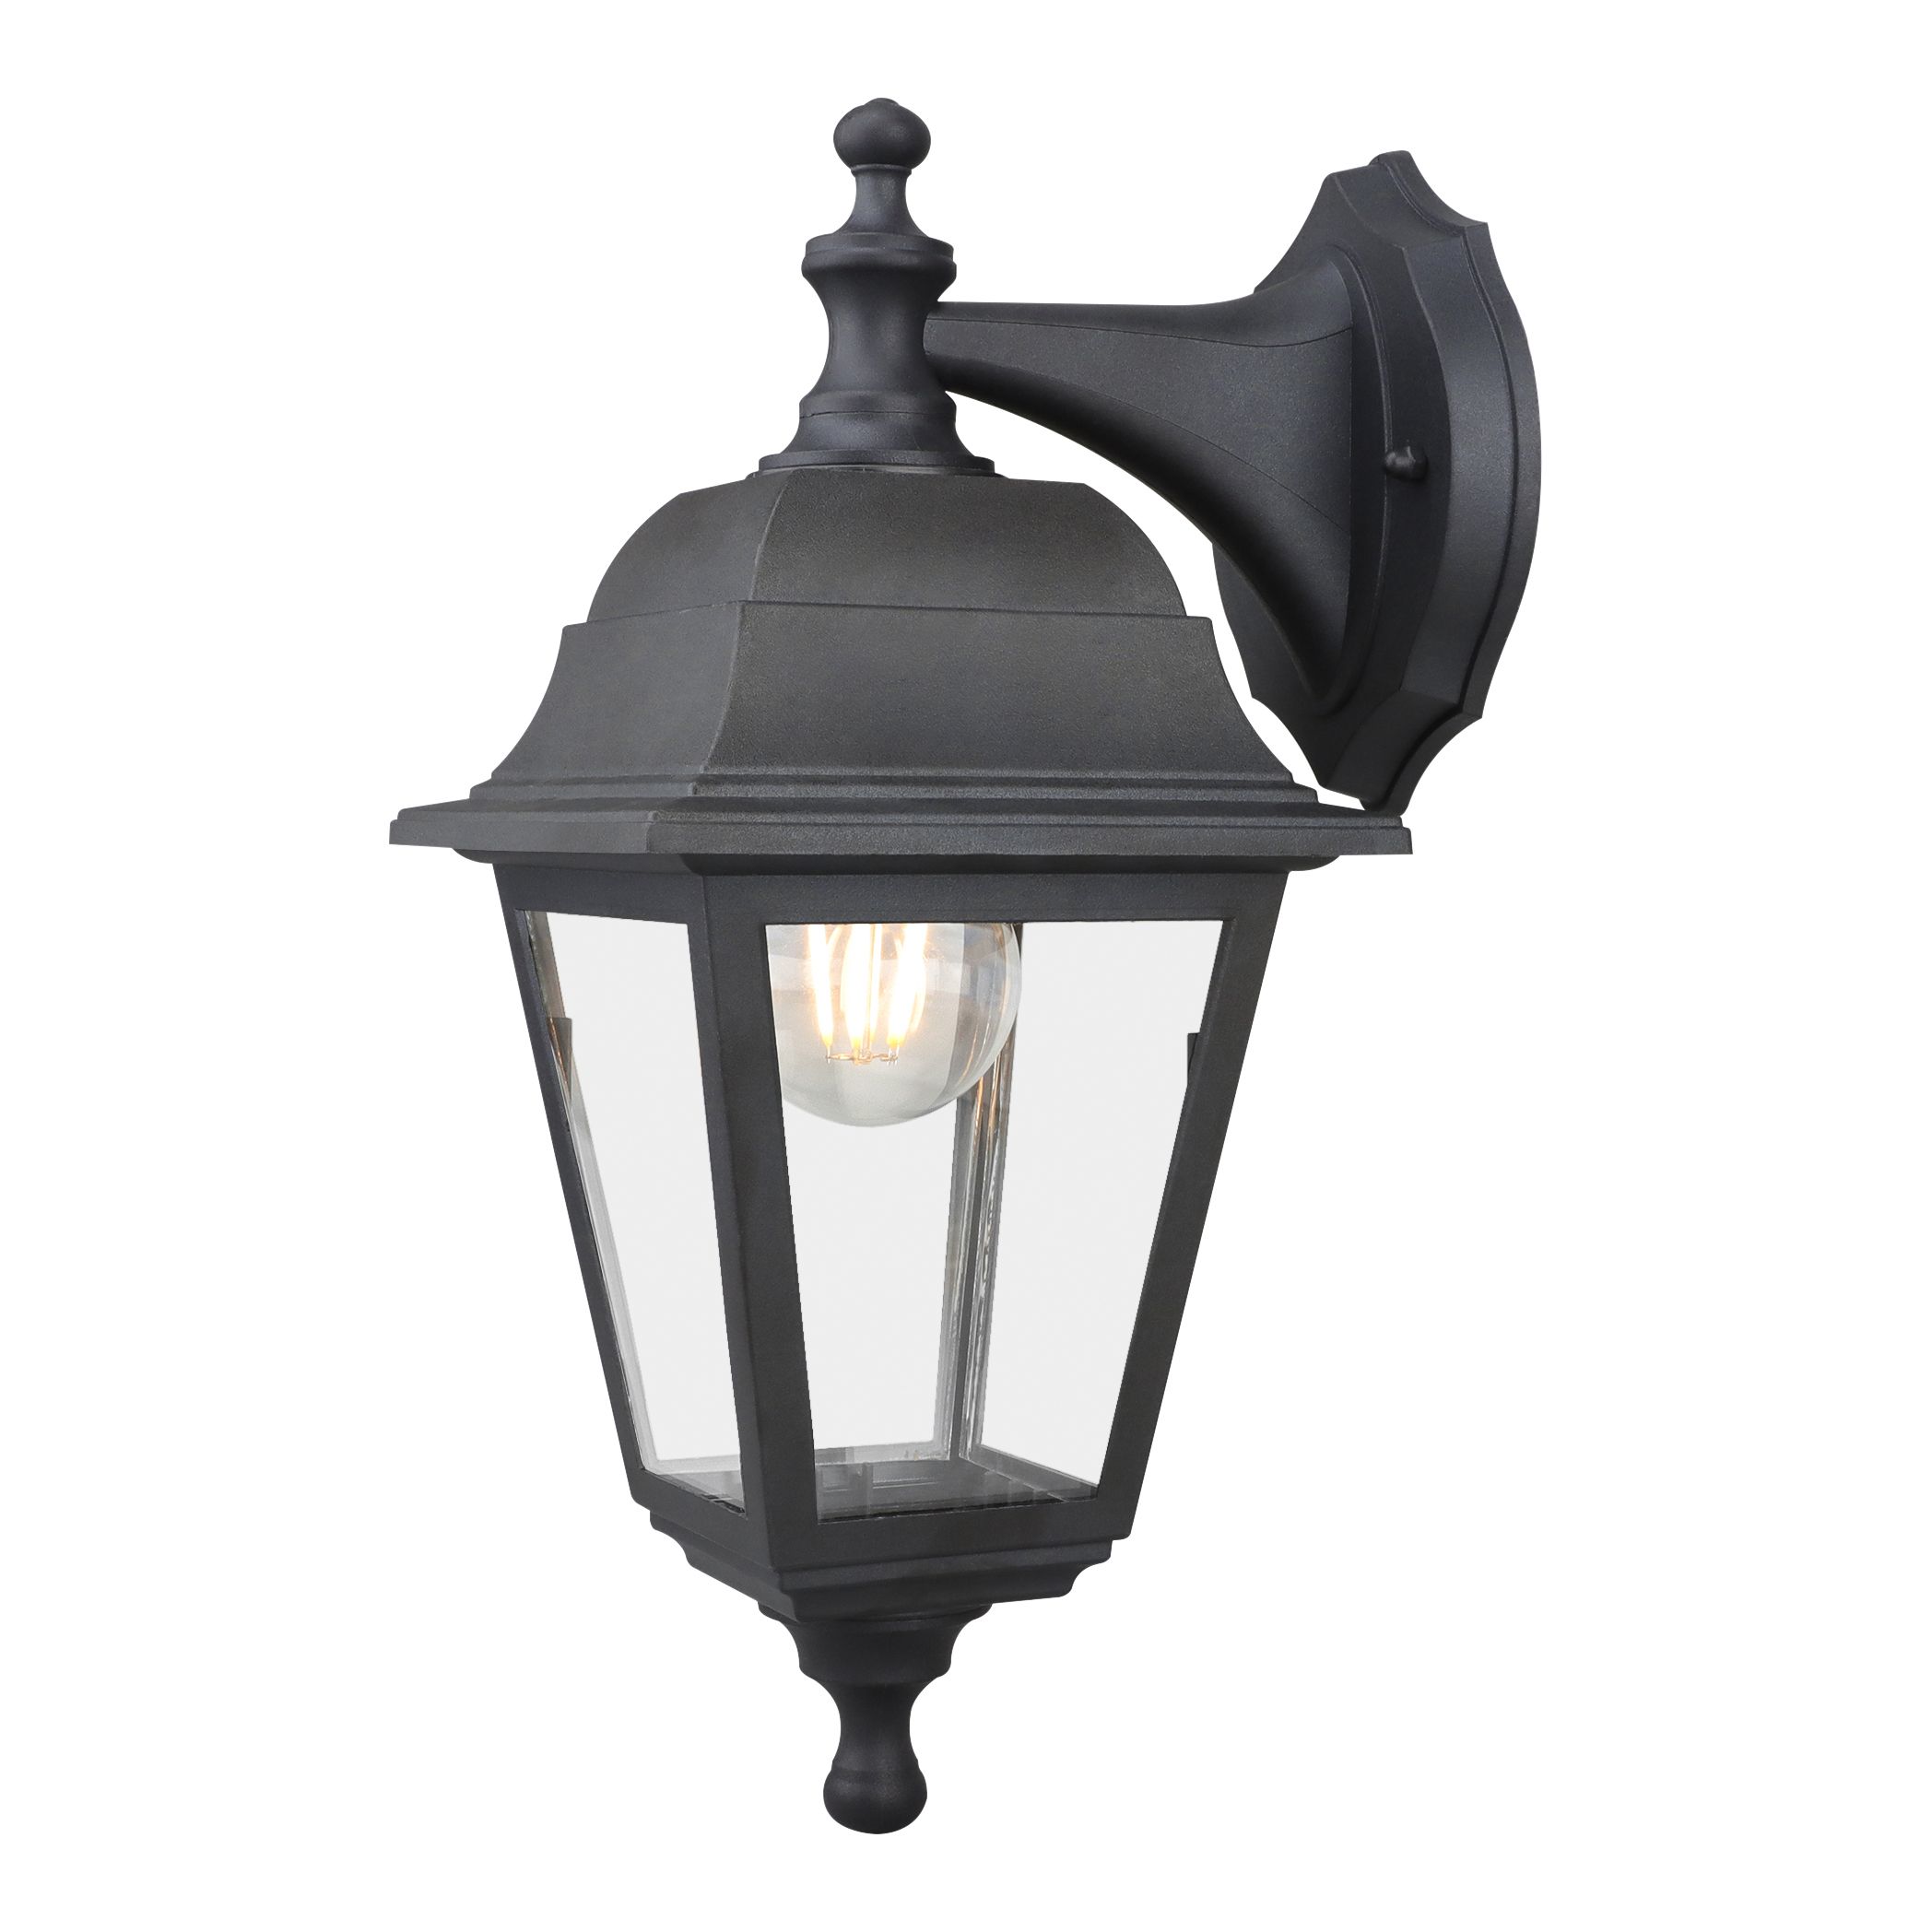 Fixed Black Mains-powered Outdoor Wall light with Up & down installation